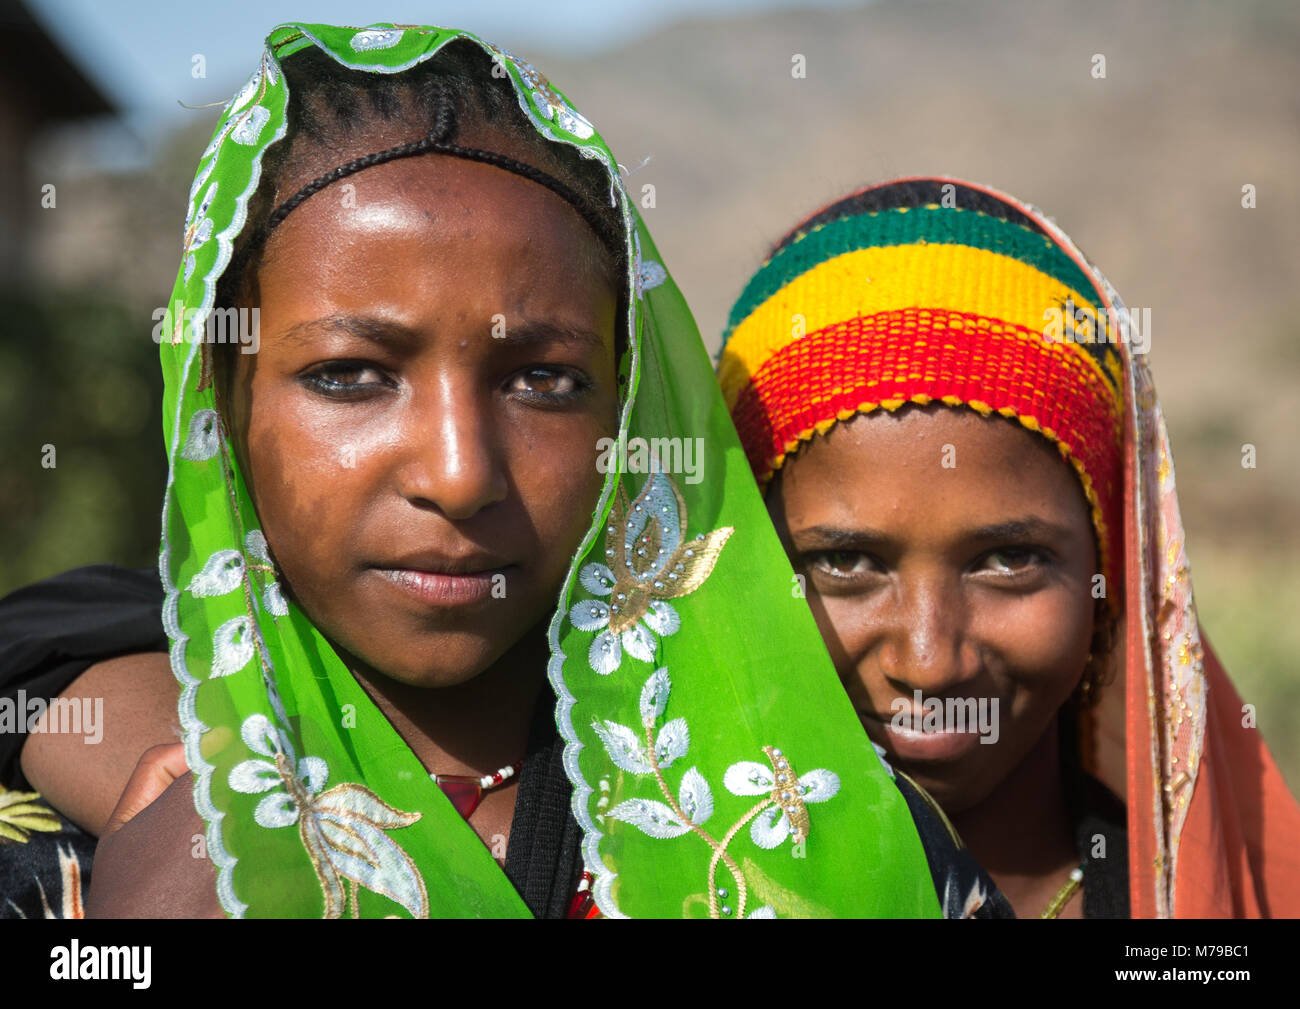 Portrait of an oromo girl wearing a headband in the colours of the ethiopian flag with her friend, Oromo region, Sambate, Ethiopia Stock Photo